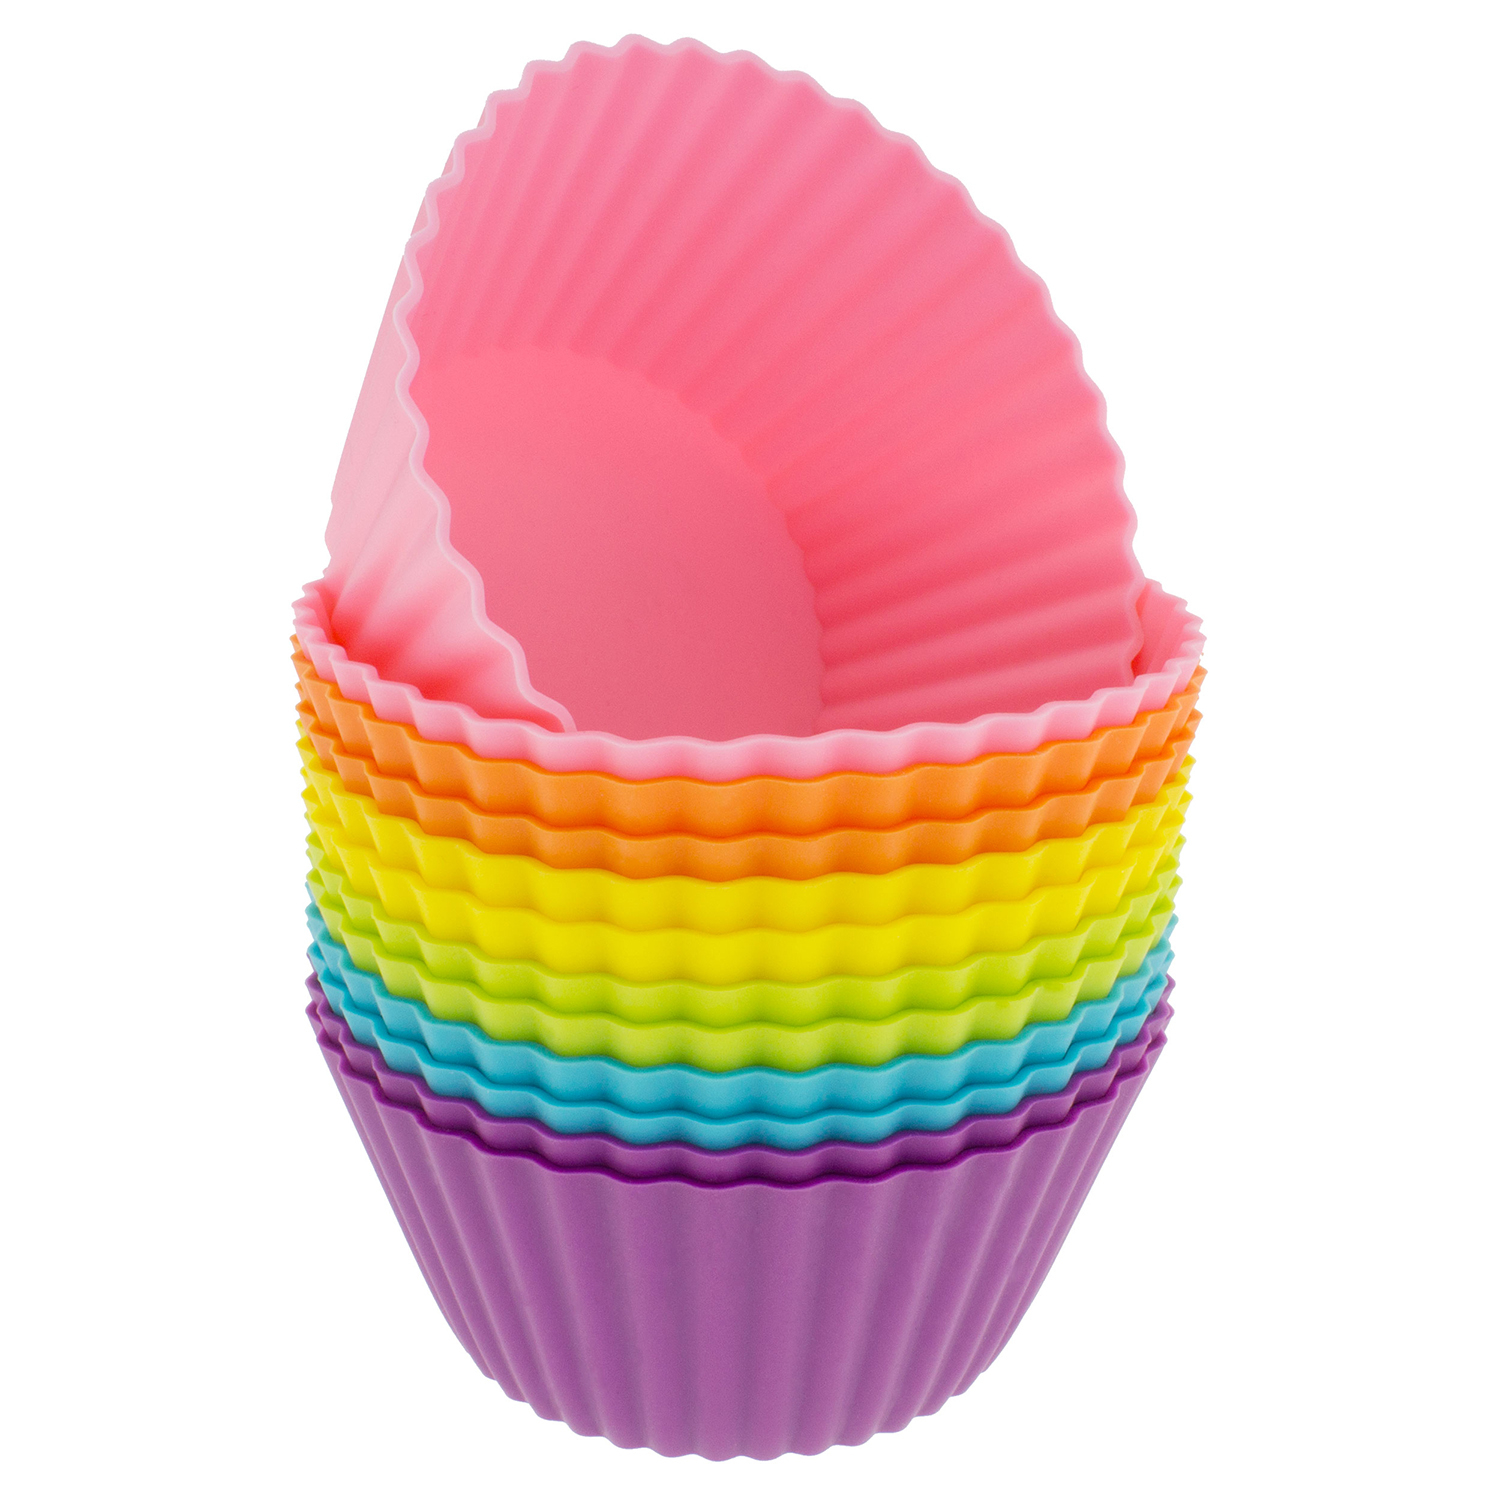 Freshware Silicone Cupcake Liners / Baking Cups - 12-Pack Jumbo Muffin Molds, 3-6/8 inch Round, Six Vibrant Colors